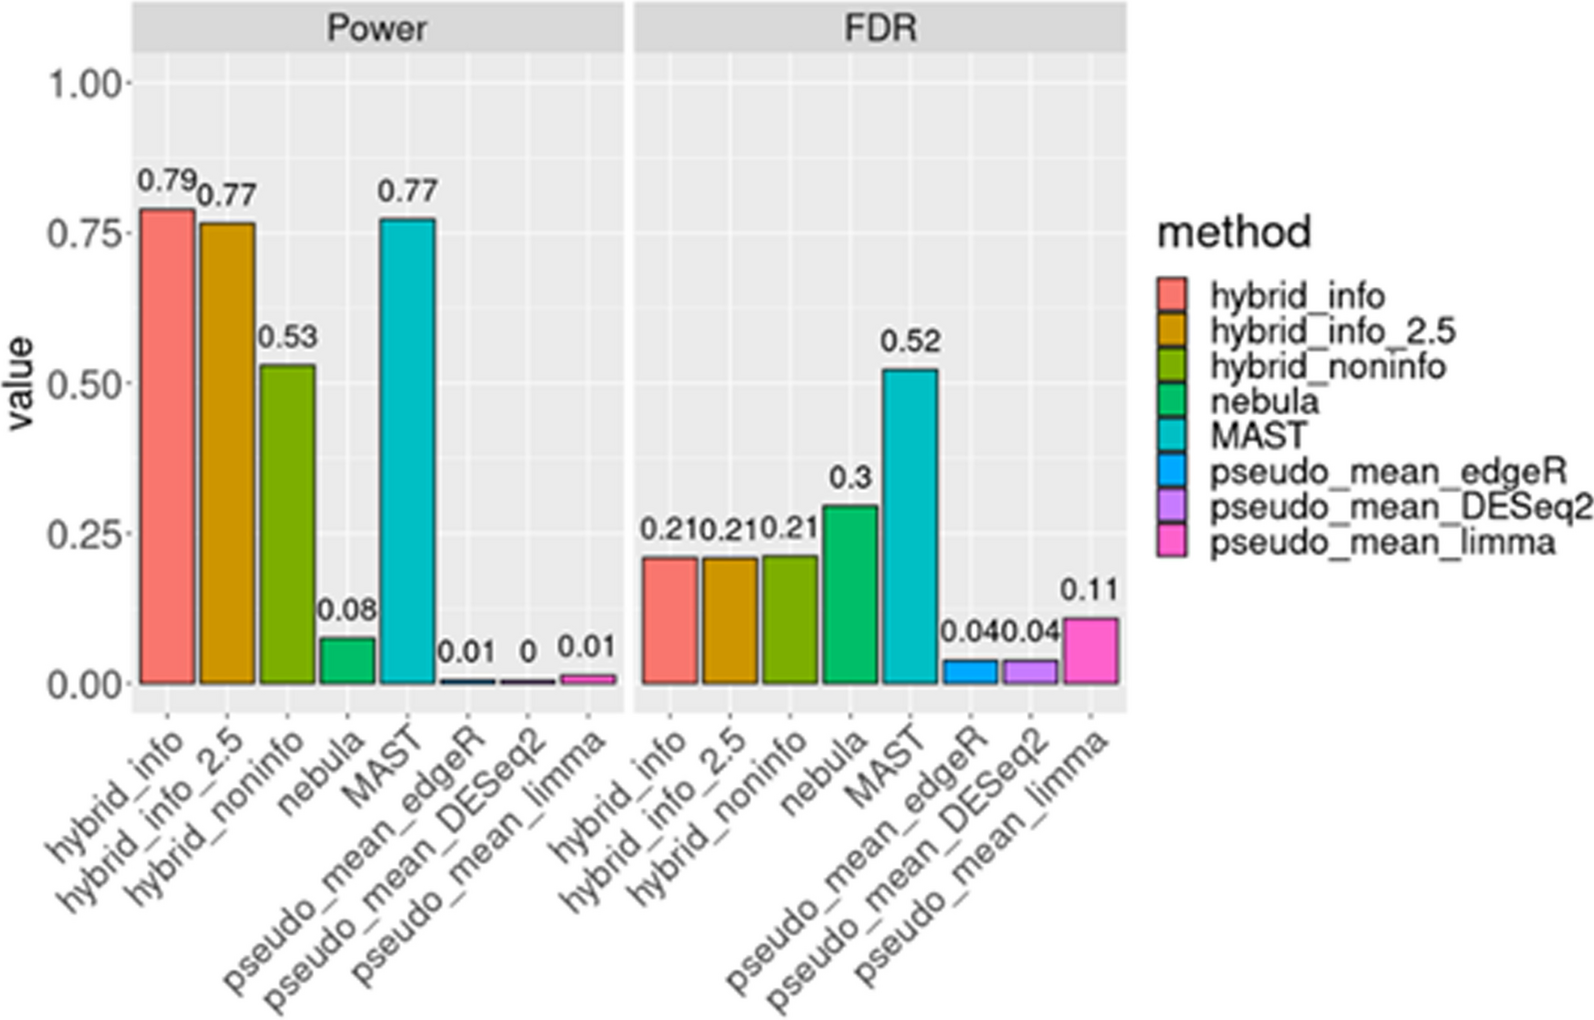 Bayesian-frequentist hybrid inference framework for single cell RNA-seq analyses